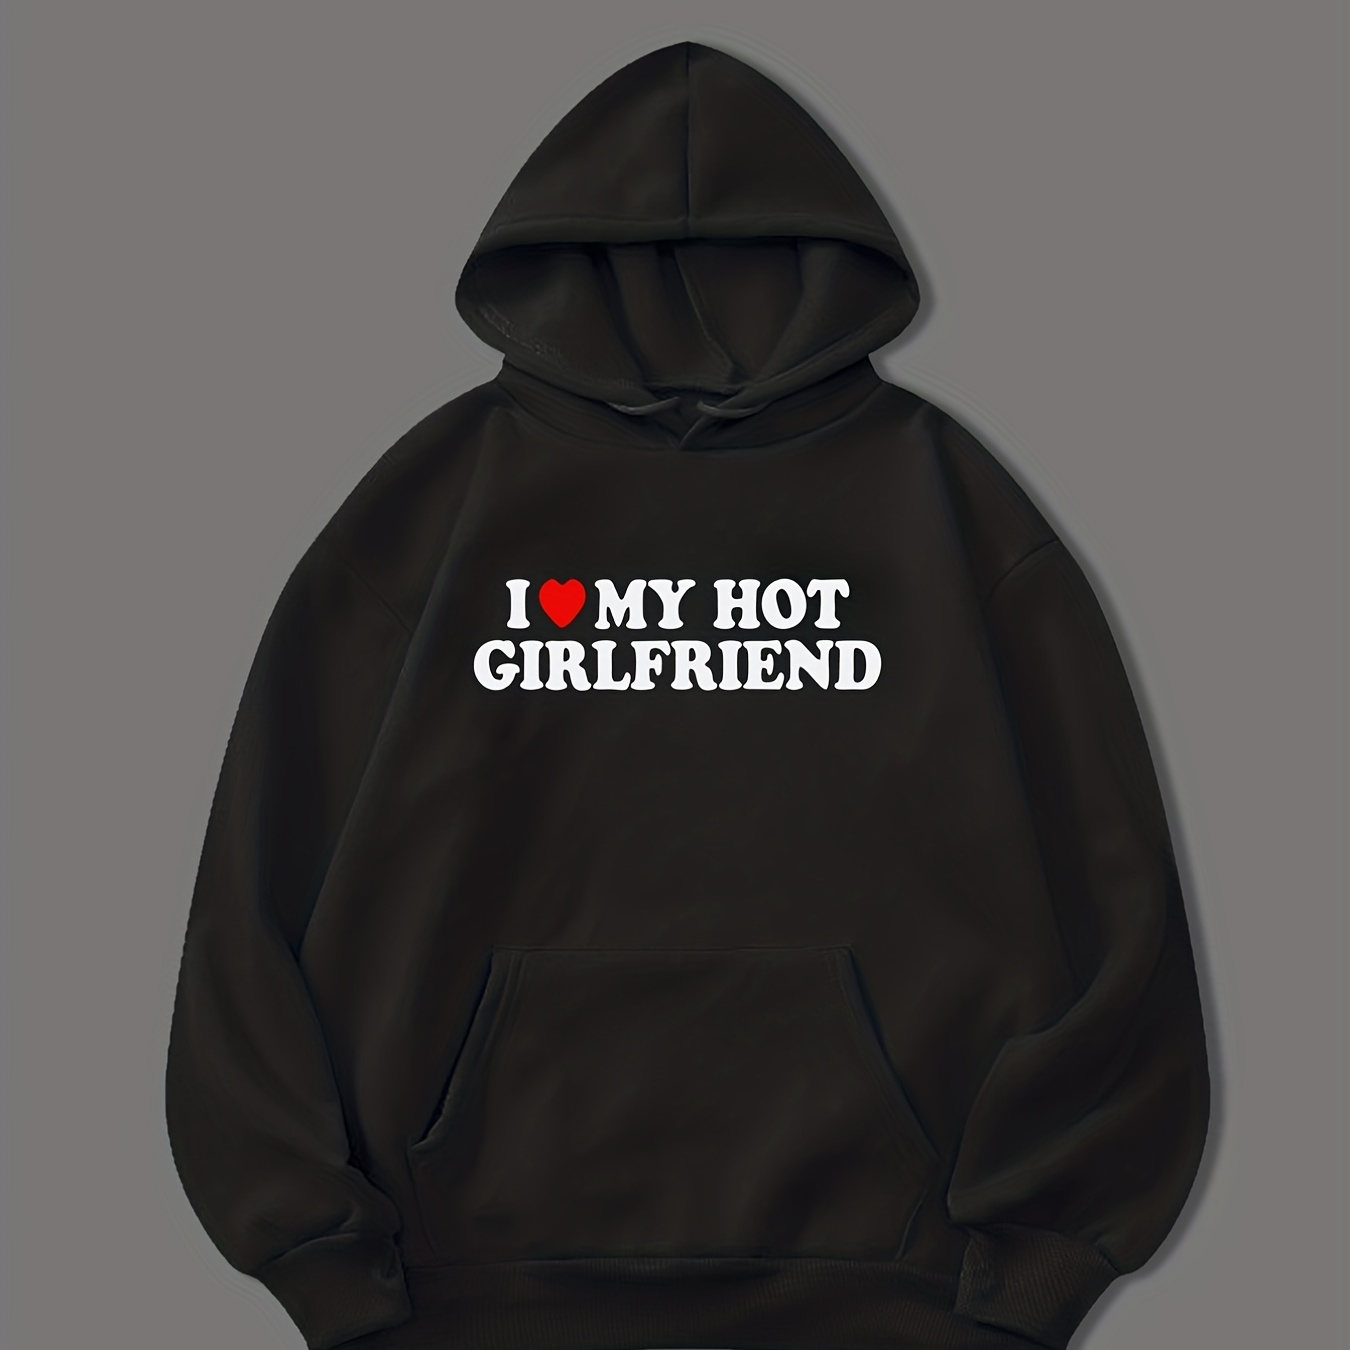 

I Love My Hot Girlfriend Print Hoodie, Hoodies For Men, Men's Casual Graphic Design Pullover Hooded Sweatshirt With Kangaroo Pocket Streetwear For Winter Fall, As Gifts For Boyfriend